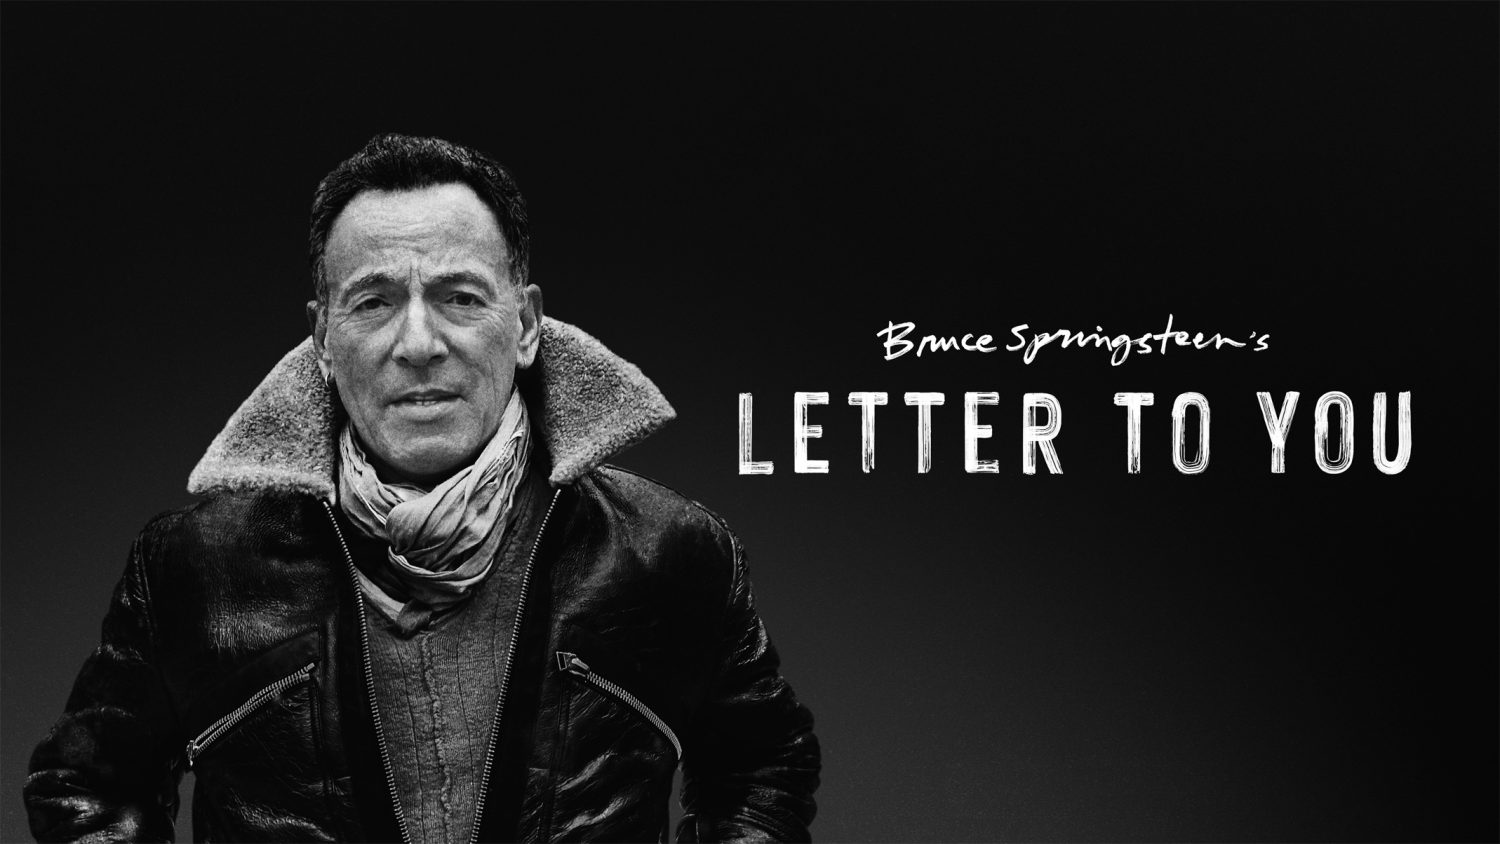 Bruce Springsteen's Letter to You Apple TV Plus